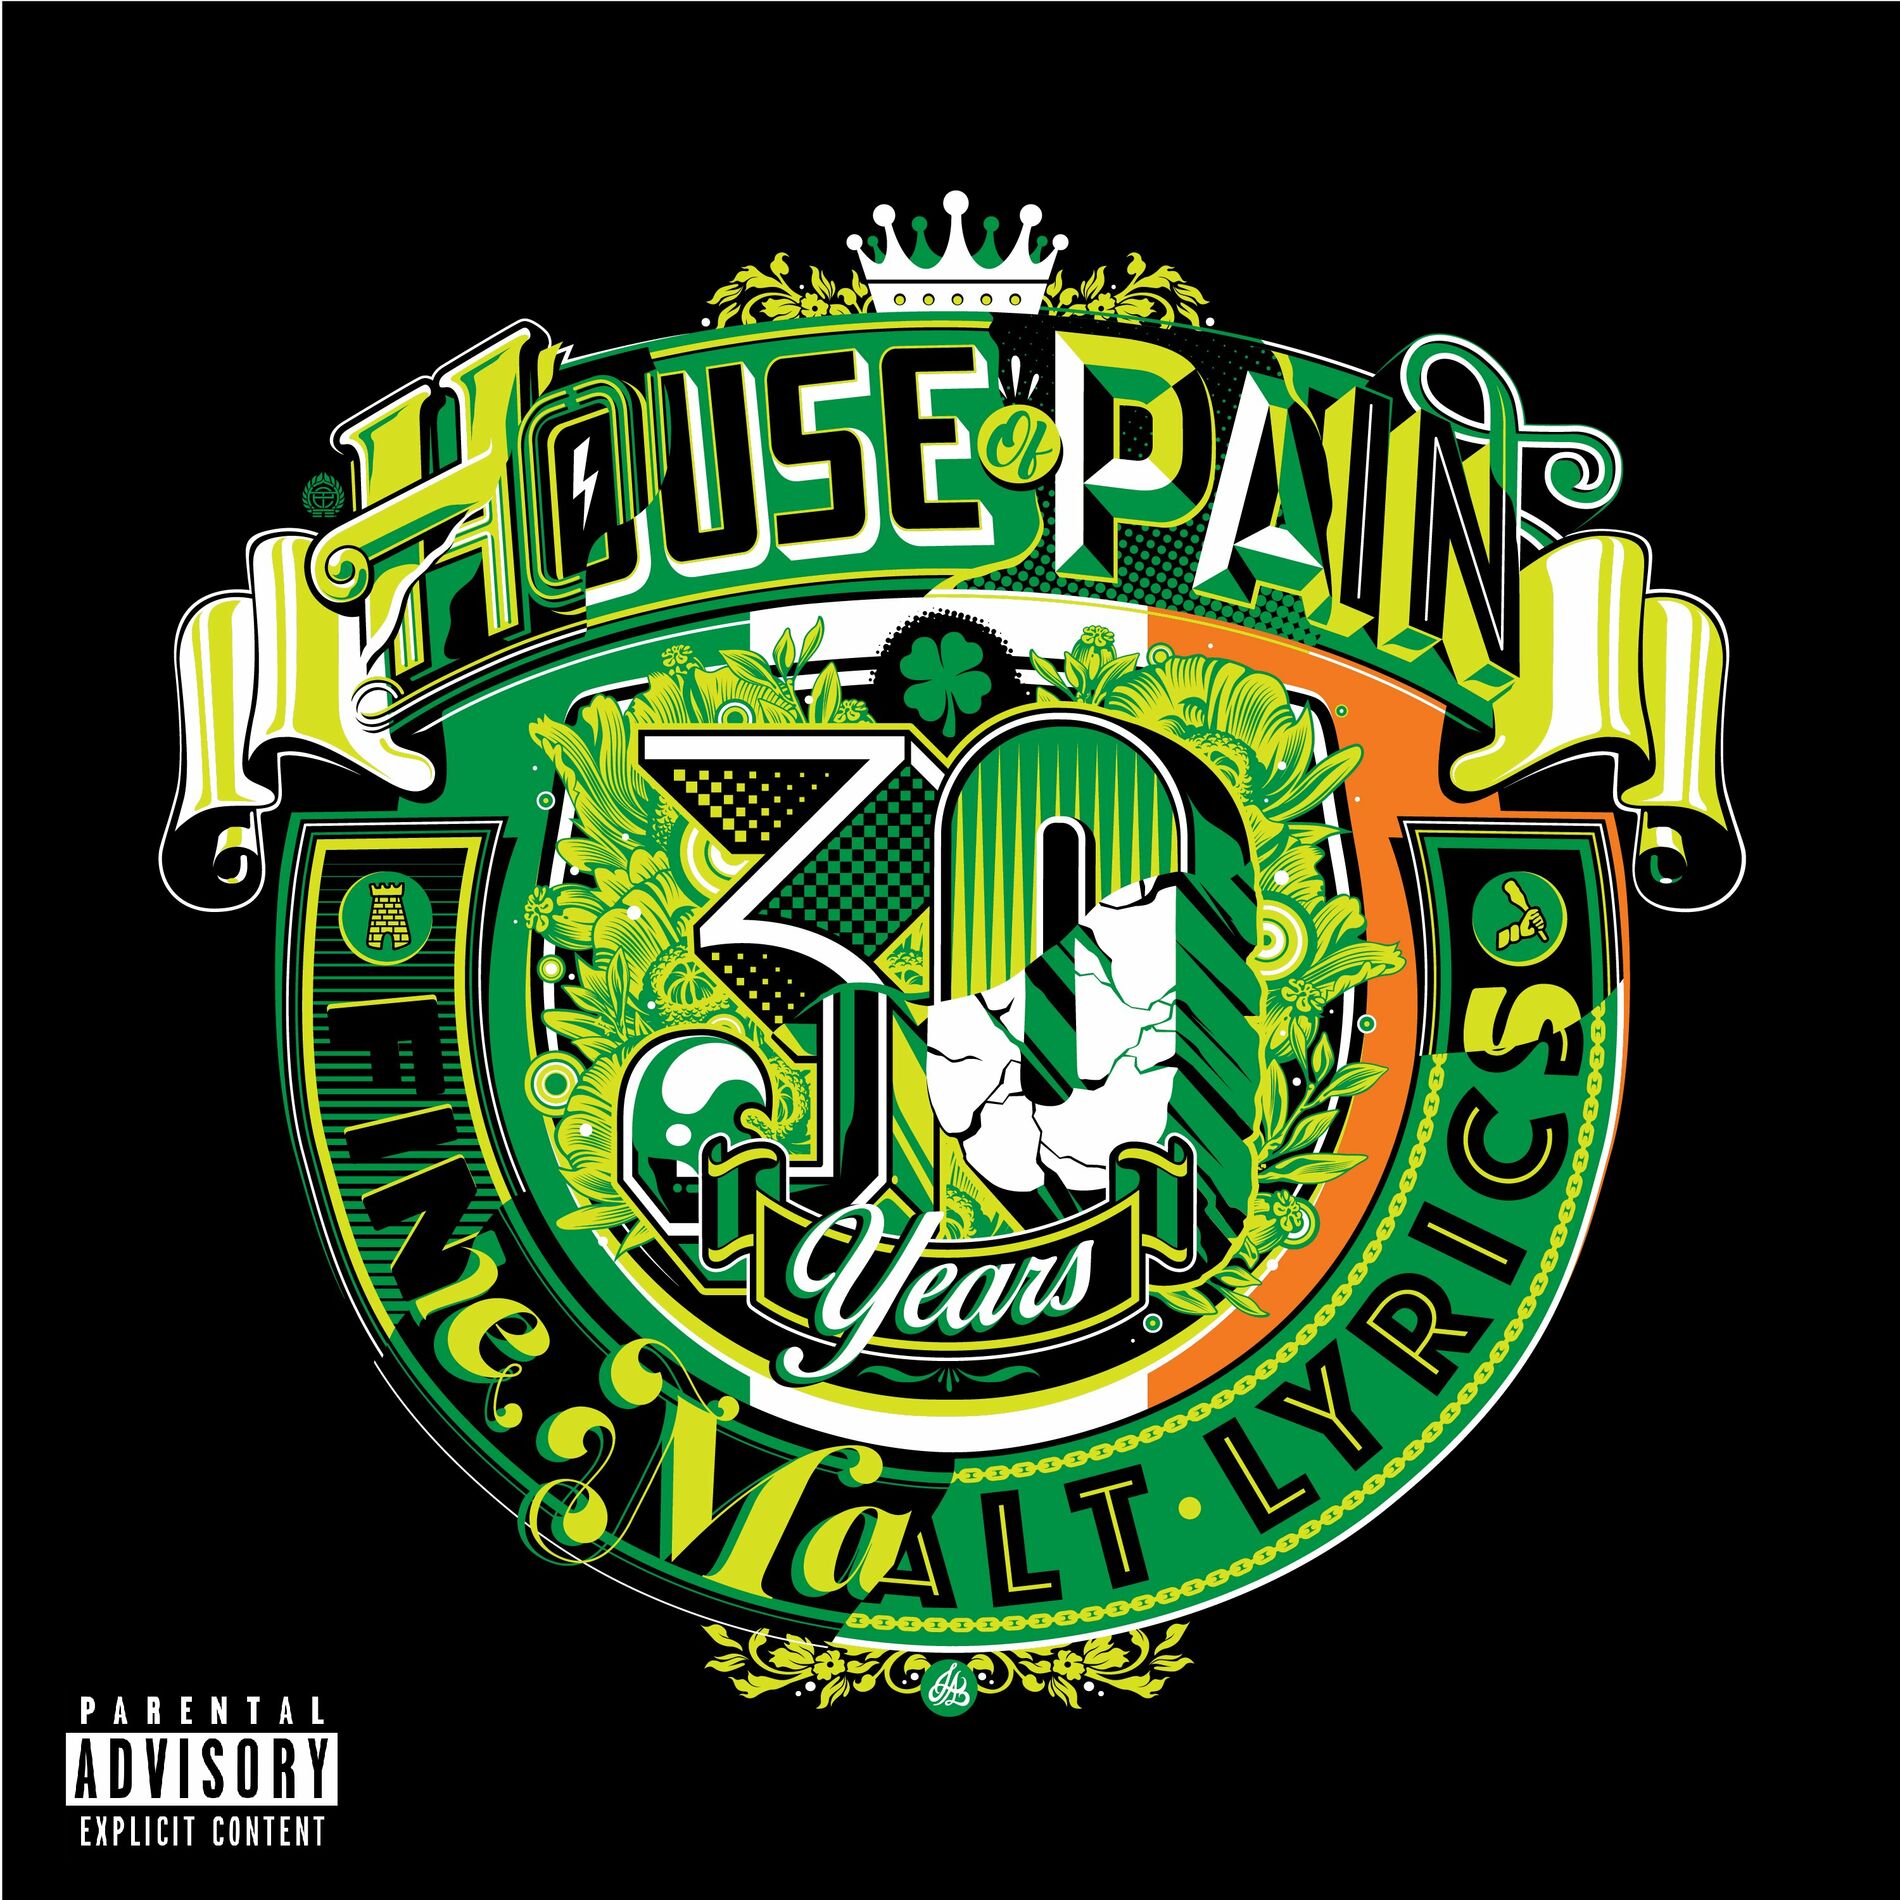 House Of Pain: albums, songs, playlists | Listen on Deezer